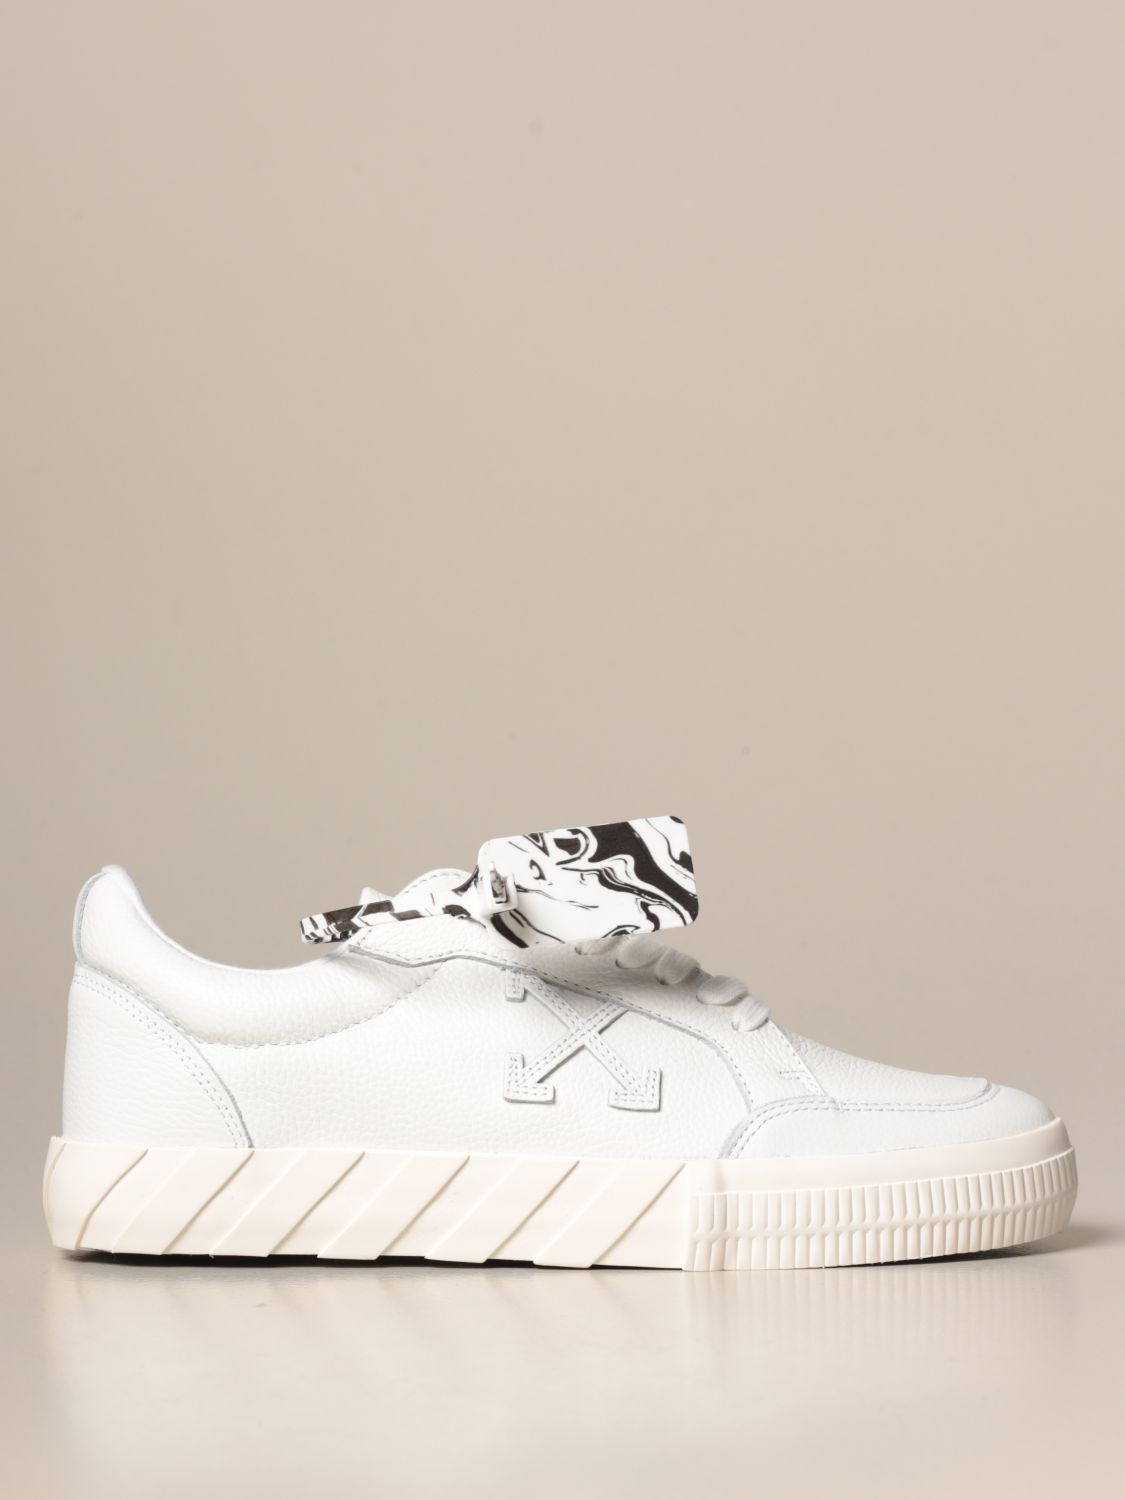 off white trainers uk